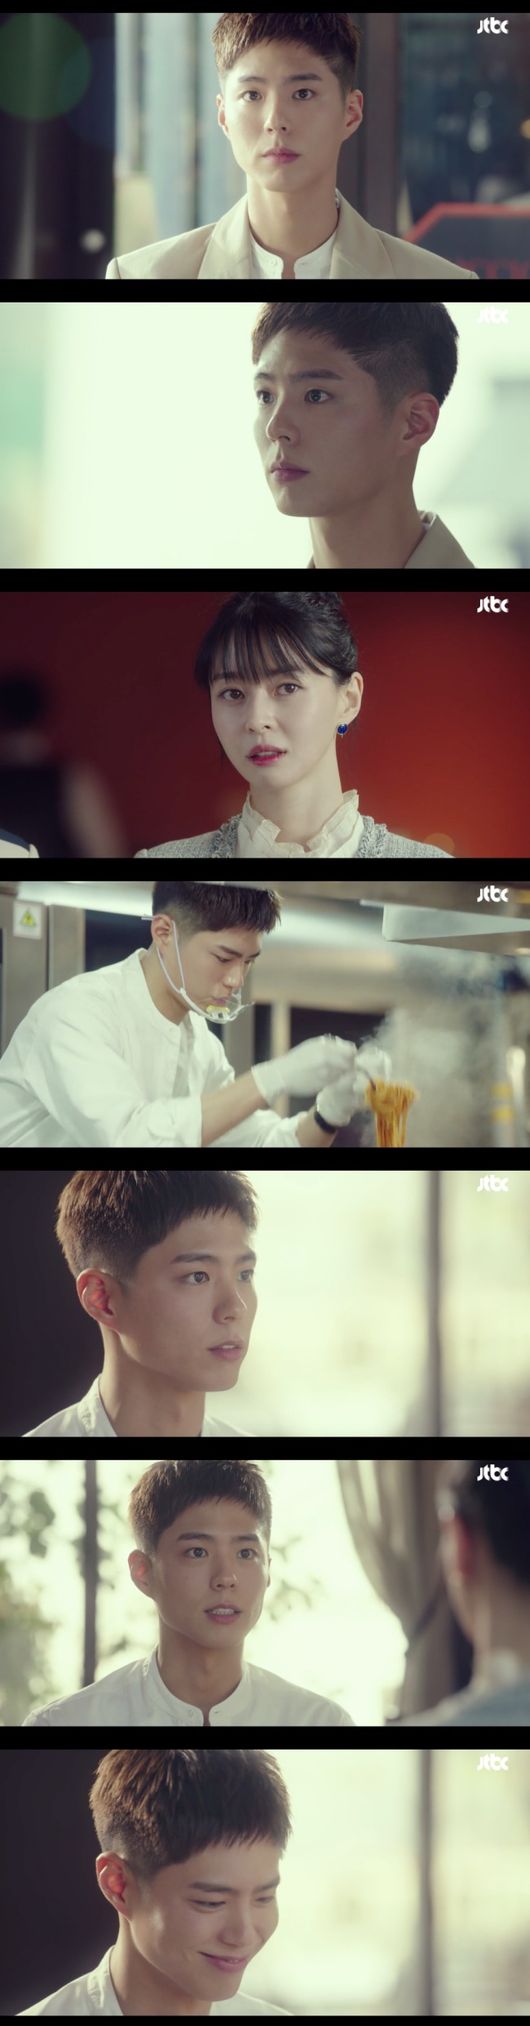 Itaewon Klath Park Bo-gum, is there such a perfect special appearance?Park Bo-gum of the righteousness brilliantly illuminated the last episode of JTBC gilt drama Itaewon Klath (playplayplay by Cho Kwang-jin, director Kim Seong-yoon).It appeared as a handsome Chef, capturing attention, foreshadowing the formation of a new relationship with Oh Soo-ah (Kwon Nara Boone); it is the last episode that was richer with the appearance of Park Bo-gum.In the last episode of Itaewon Klath, which aired on the afternoon of the 21st, Oh Soo-ah (Kwon Nara) was shown quitting the company as an whistleblower when he accused the prosecution of corruption in the house.Oh Soo-ah has only now escaped from the long house and paid a little debt to Park Sung-yeol (Son Hyun-joo), a father-like person who helped him.Oh Soo-ah left Jangga and paid Park Sung-yeol the debt of his heart, and he was free from Park (Park Seo-joon).He said he would live a real life for himself, and Roy cheered Oh Soo-ah as a friend. Oh Soo-ah asked him to be happy.The new start of Oh Soo-ah featured handsome Chef, who was well-run by opening a new store with investment from Hong Seok-cheon.And Park Bo-gum appeared as a handsome Chef, and Oh Soo-ah was drawn at first sight.Park Bo-gum made a special gift to viewers as he made a special appearance in the last episode of Itaewon Clath with Kim Seong-yoon PD, who had a relationship in the drama Gurmigreen Moonlight.At the end of the show, he appeared briefly as a handsome Chef, but his appearance was enough to focus attention. It was more special to his fans as he met in the drama for a long time.Park Bo-gums brilliant special appearance, could not be more perfect.JTBC broadcast screen capture